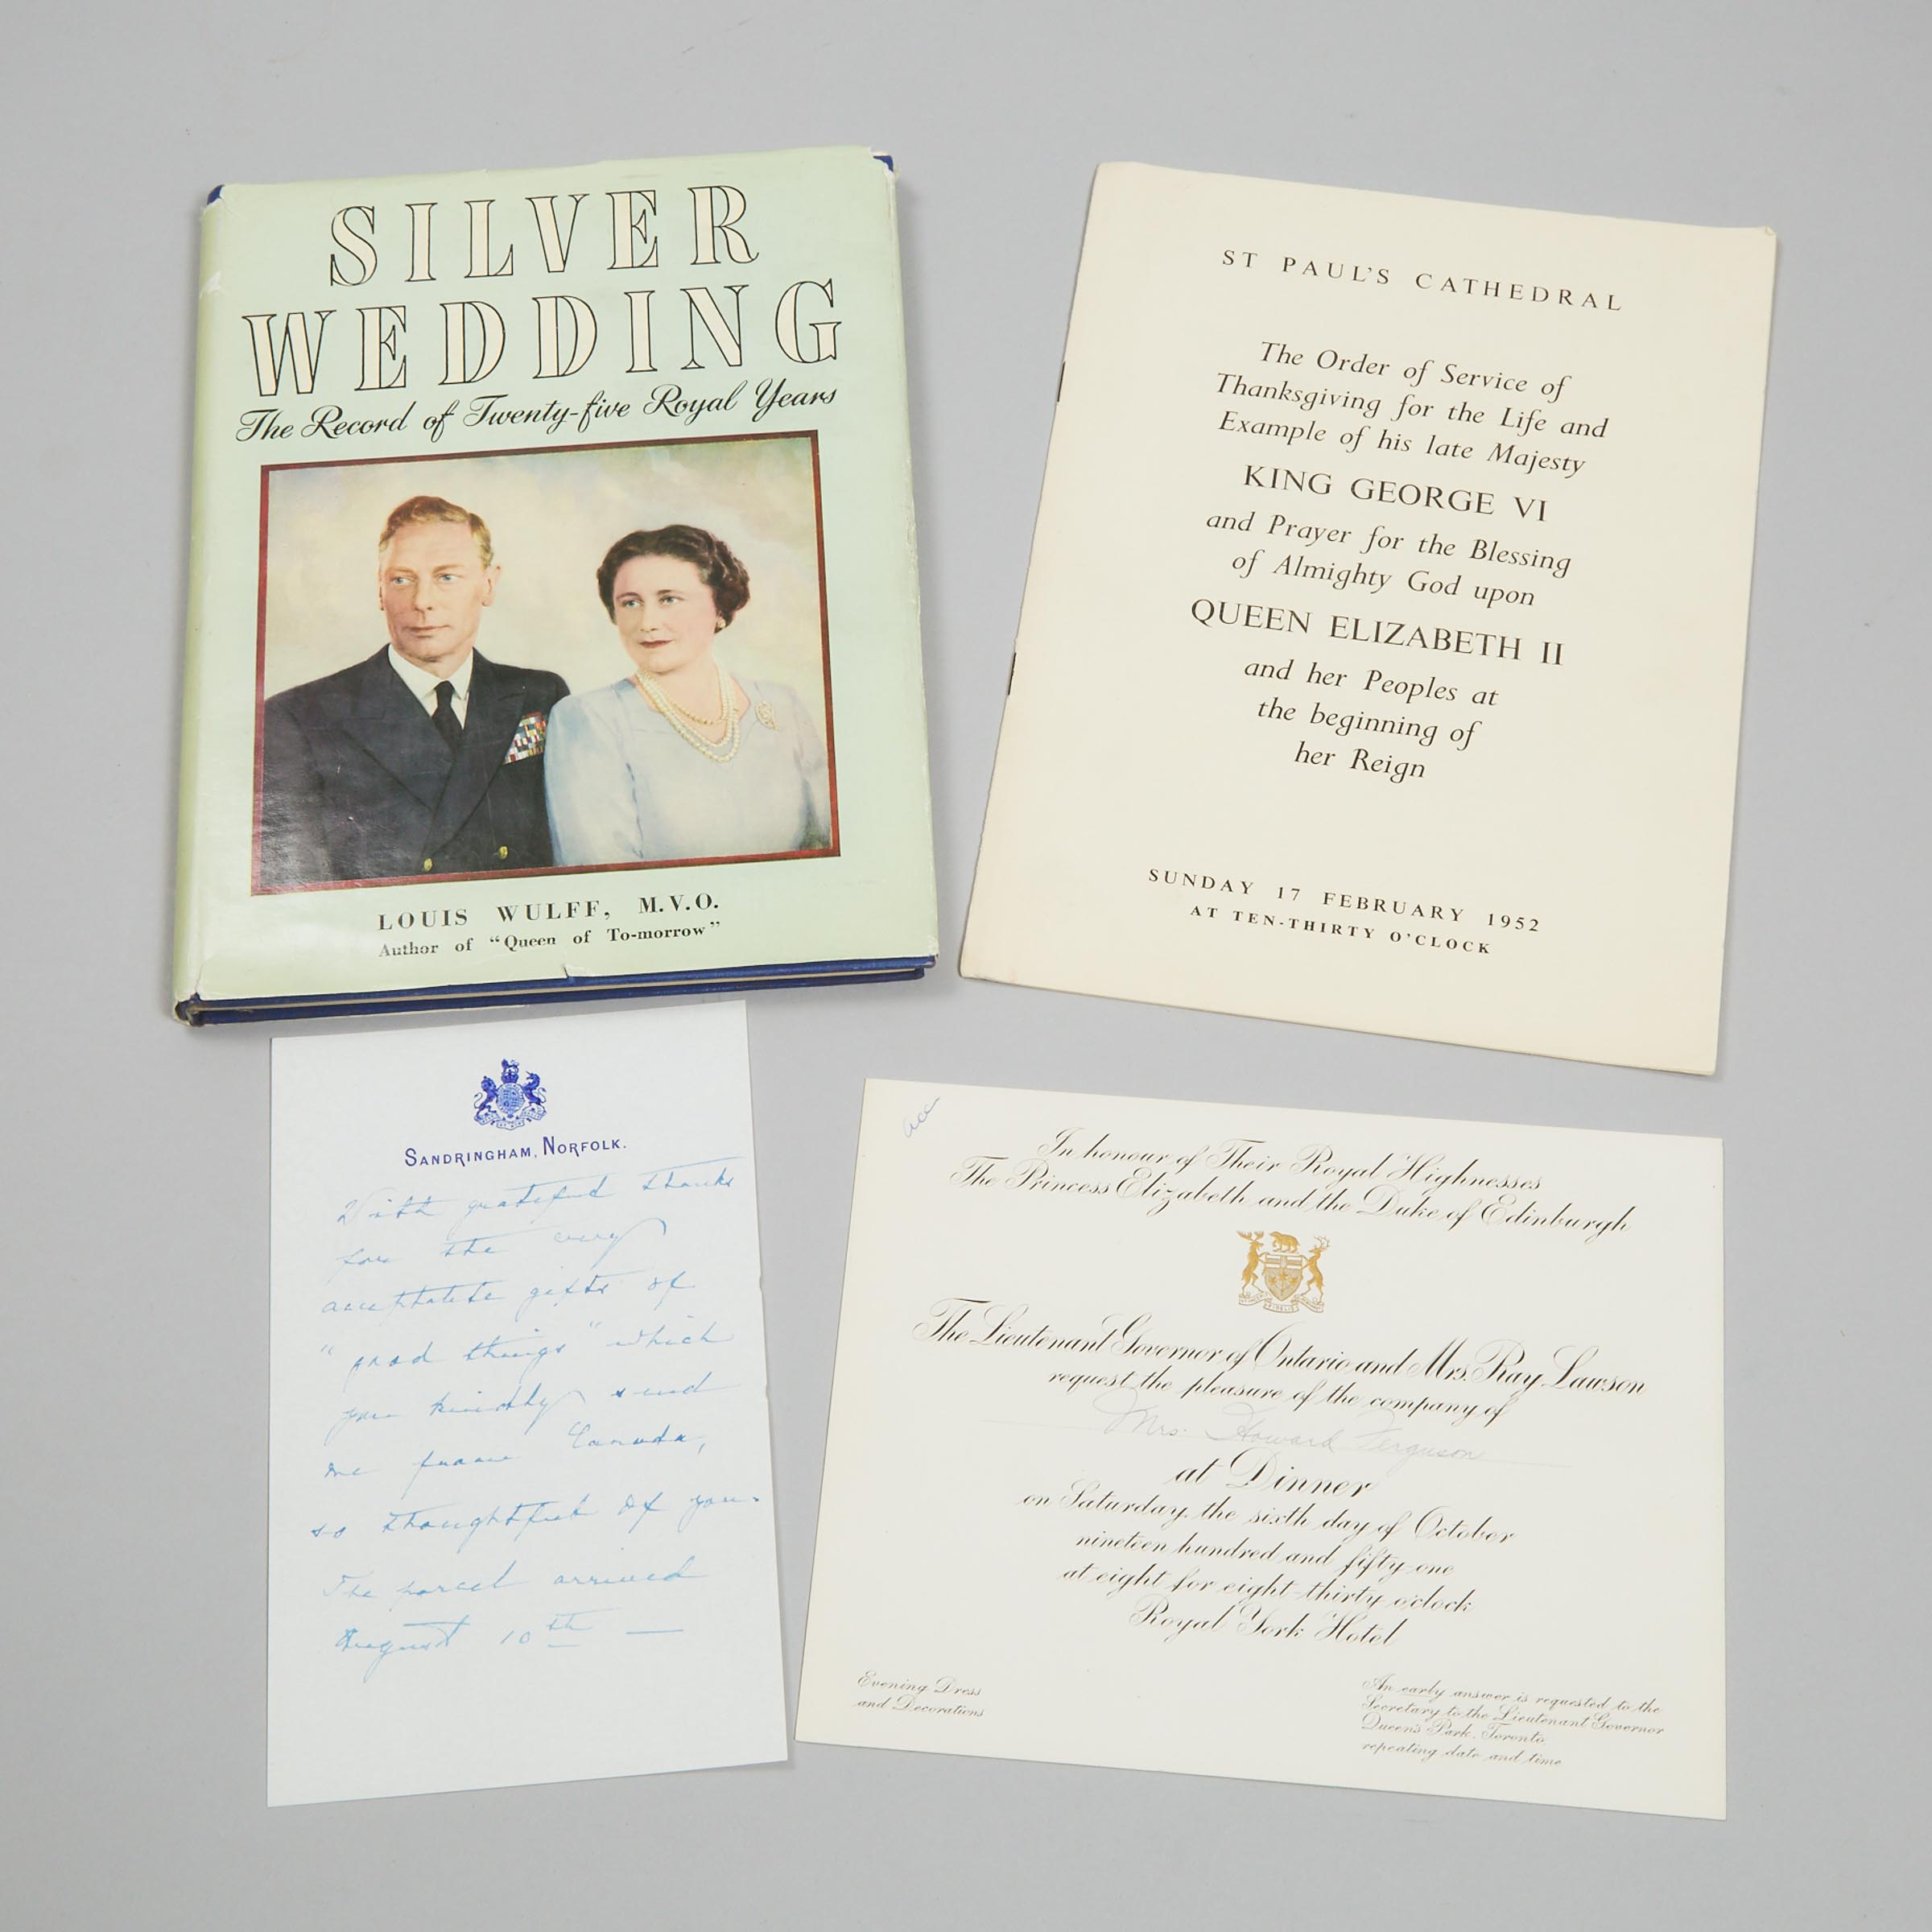 Signed Royal Presentation Copy of 'Silver Wedding, The Record of Twenty-Five Royal Years', 1948